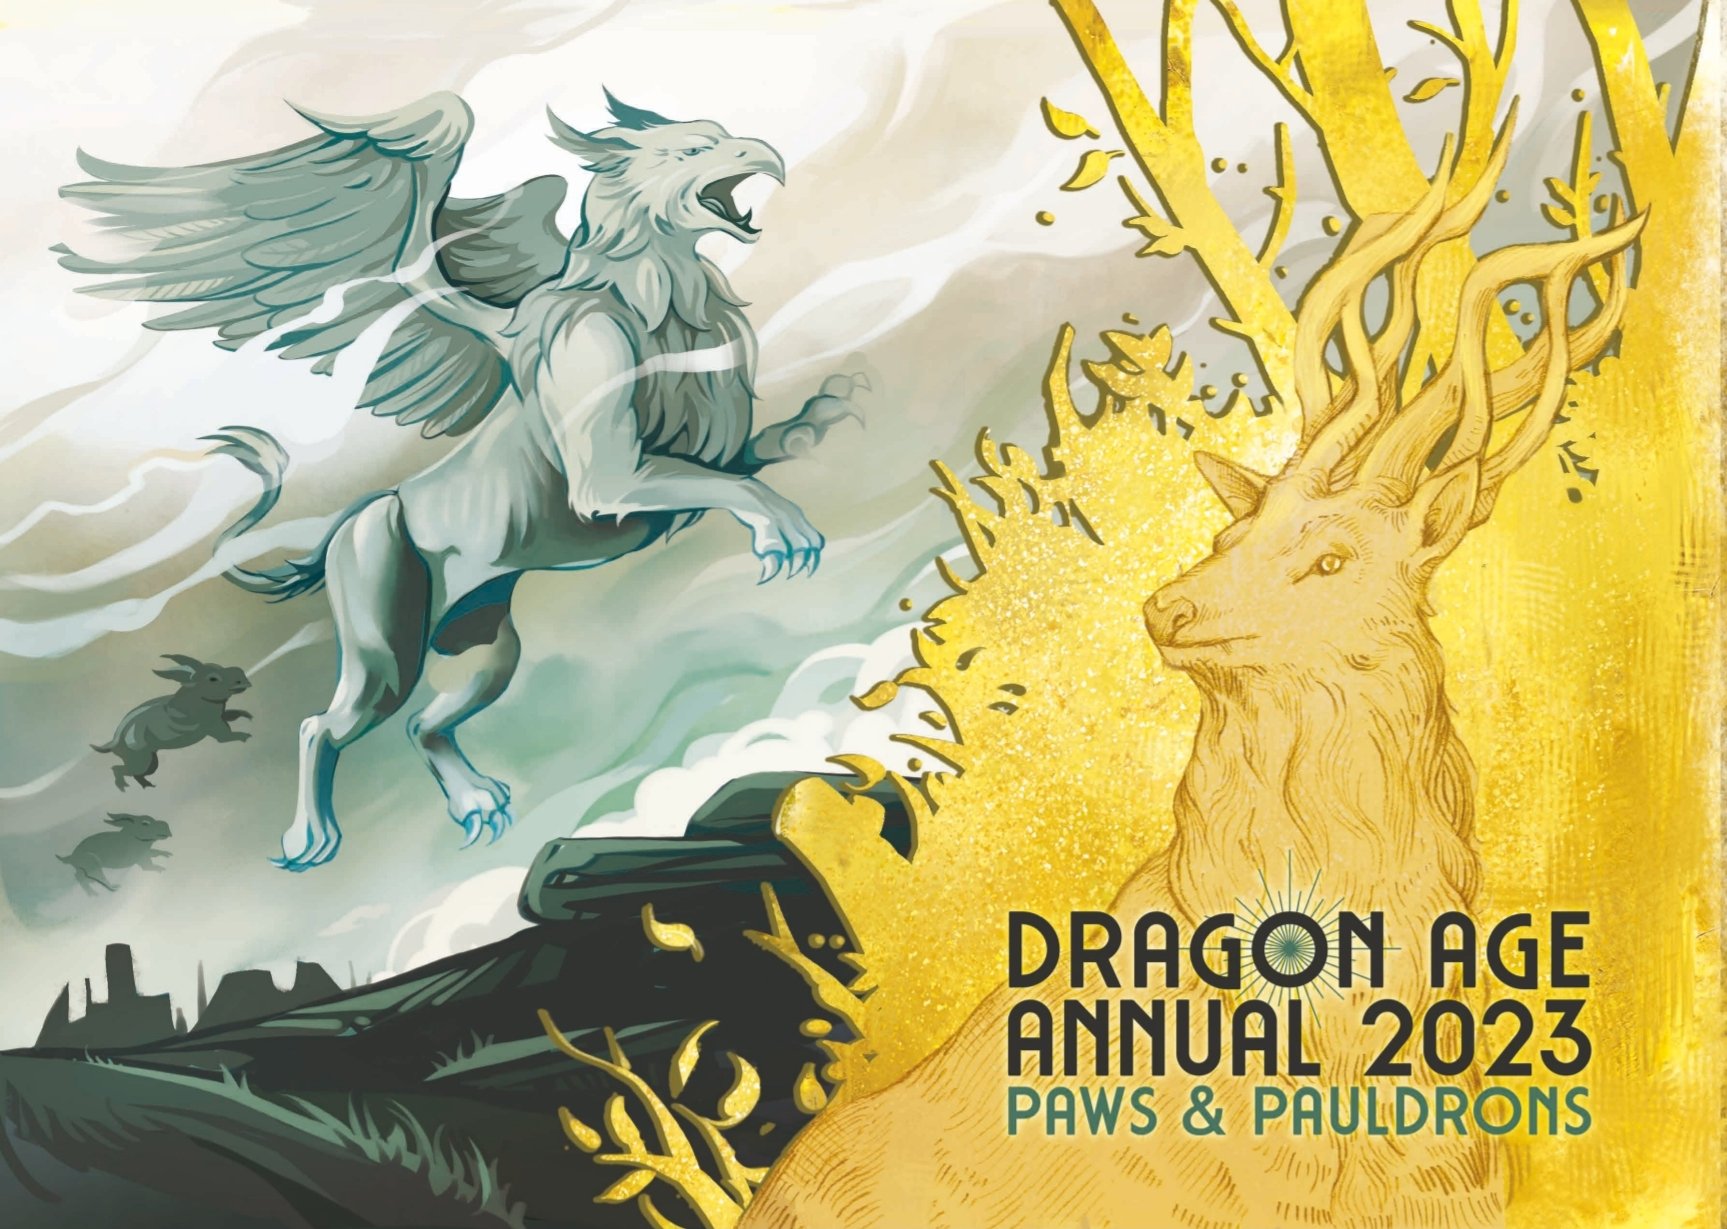 The cover for the 2023 Dragon Age Annual. The background is a greenish hued landscape, featuring an ethereal ghostly griffin. Behind the griffin in silhouette are floating nugs. On the right side, overlaying the background is a golden cutout of shrubs and branches featuring a halla who's horns blend into the branches above. In front of the halla in black text is 'Dragon Age Annual 2023' and beneath that in green text is 'Paws & Pauldrons'.